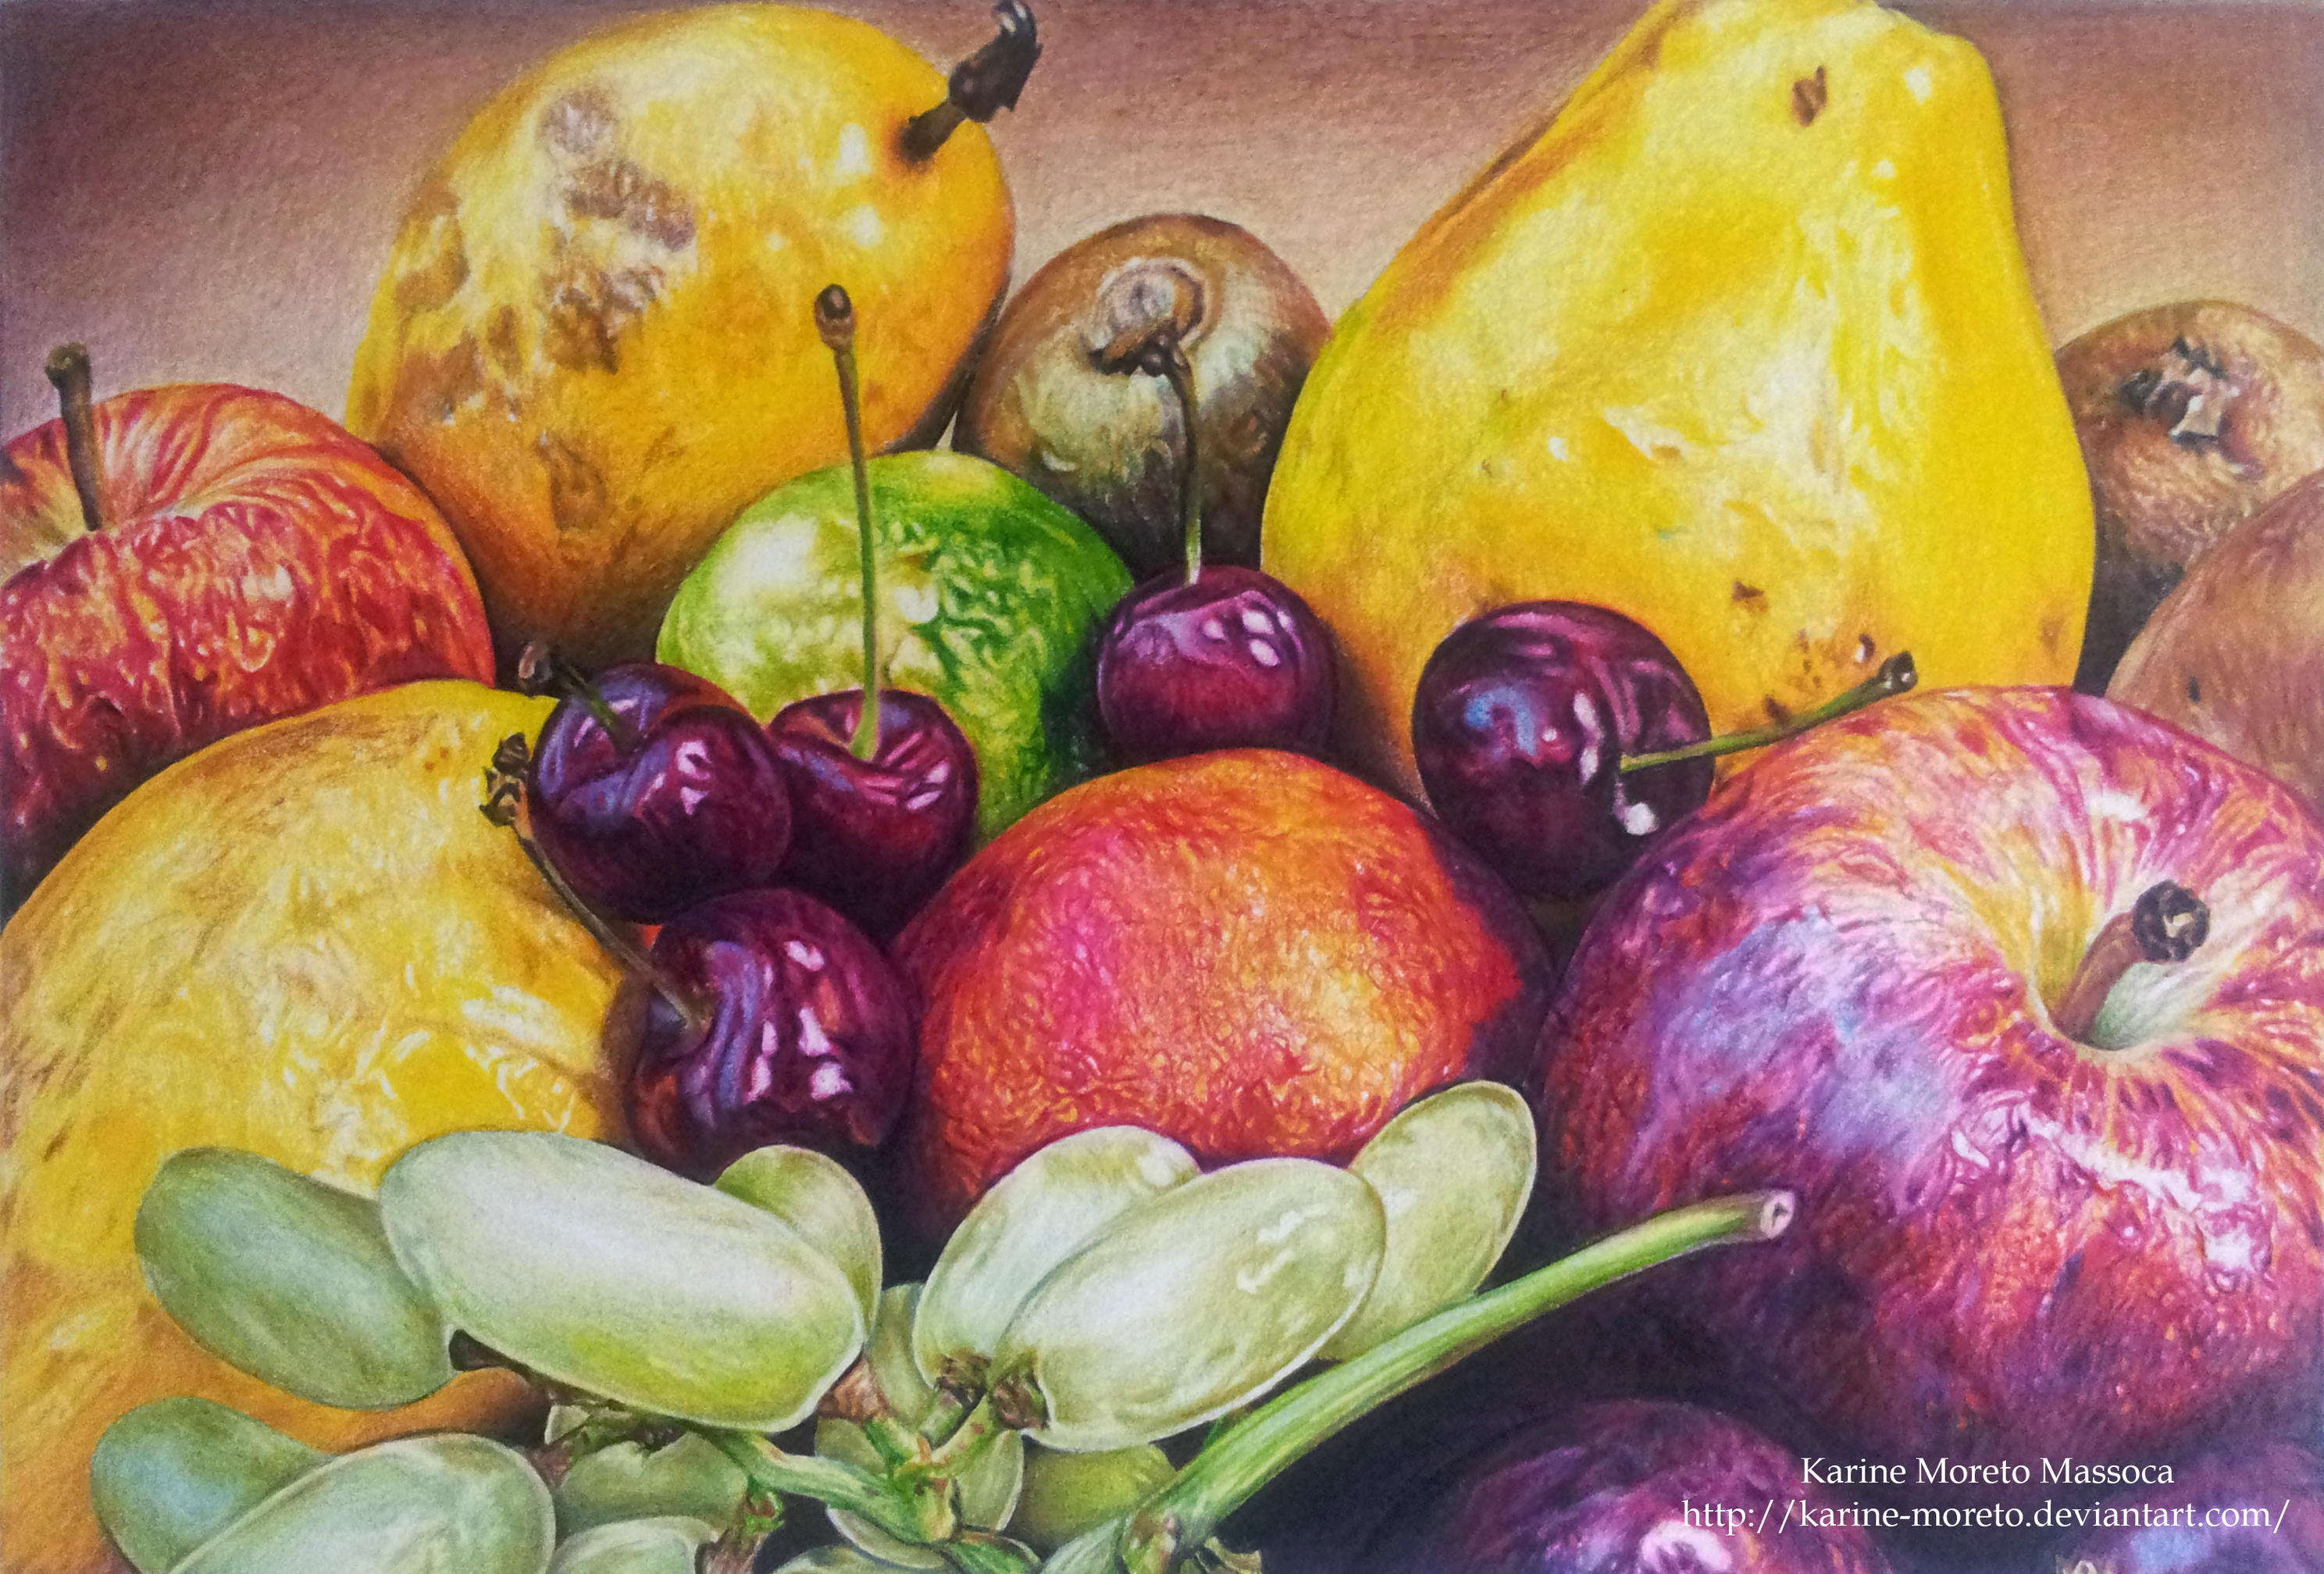 Colored Pencil Fruits by karinemoreto on DeviantArt